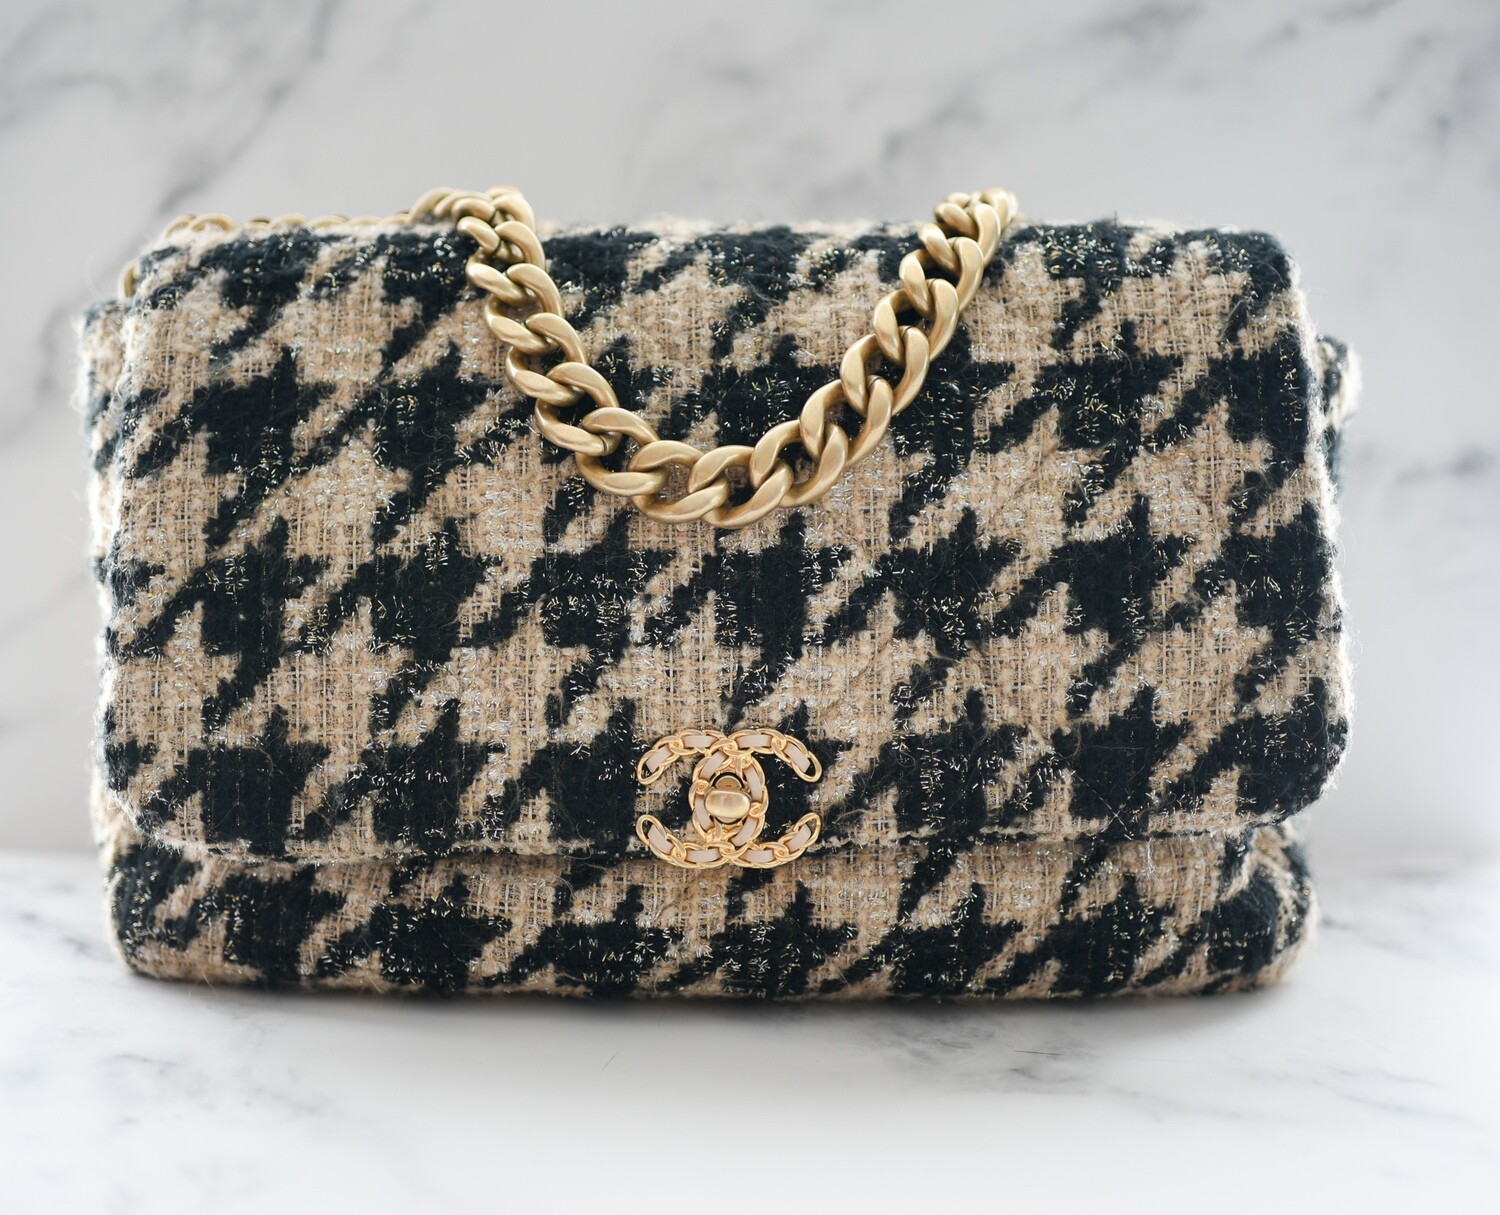 Chanel 19 Maxi, Beige and Black Houndstooth Tweed, Preowned in